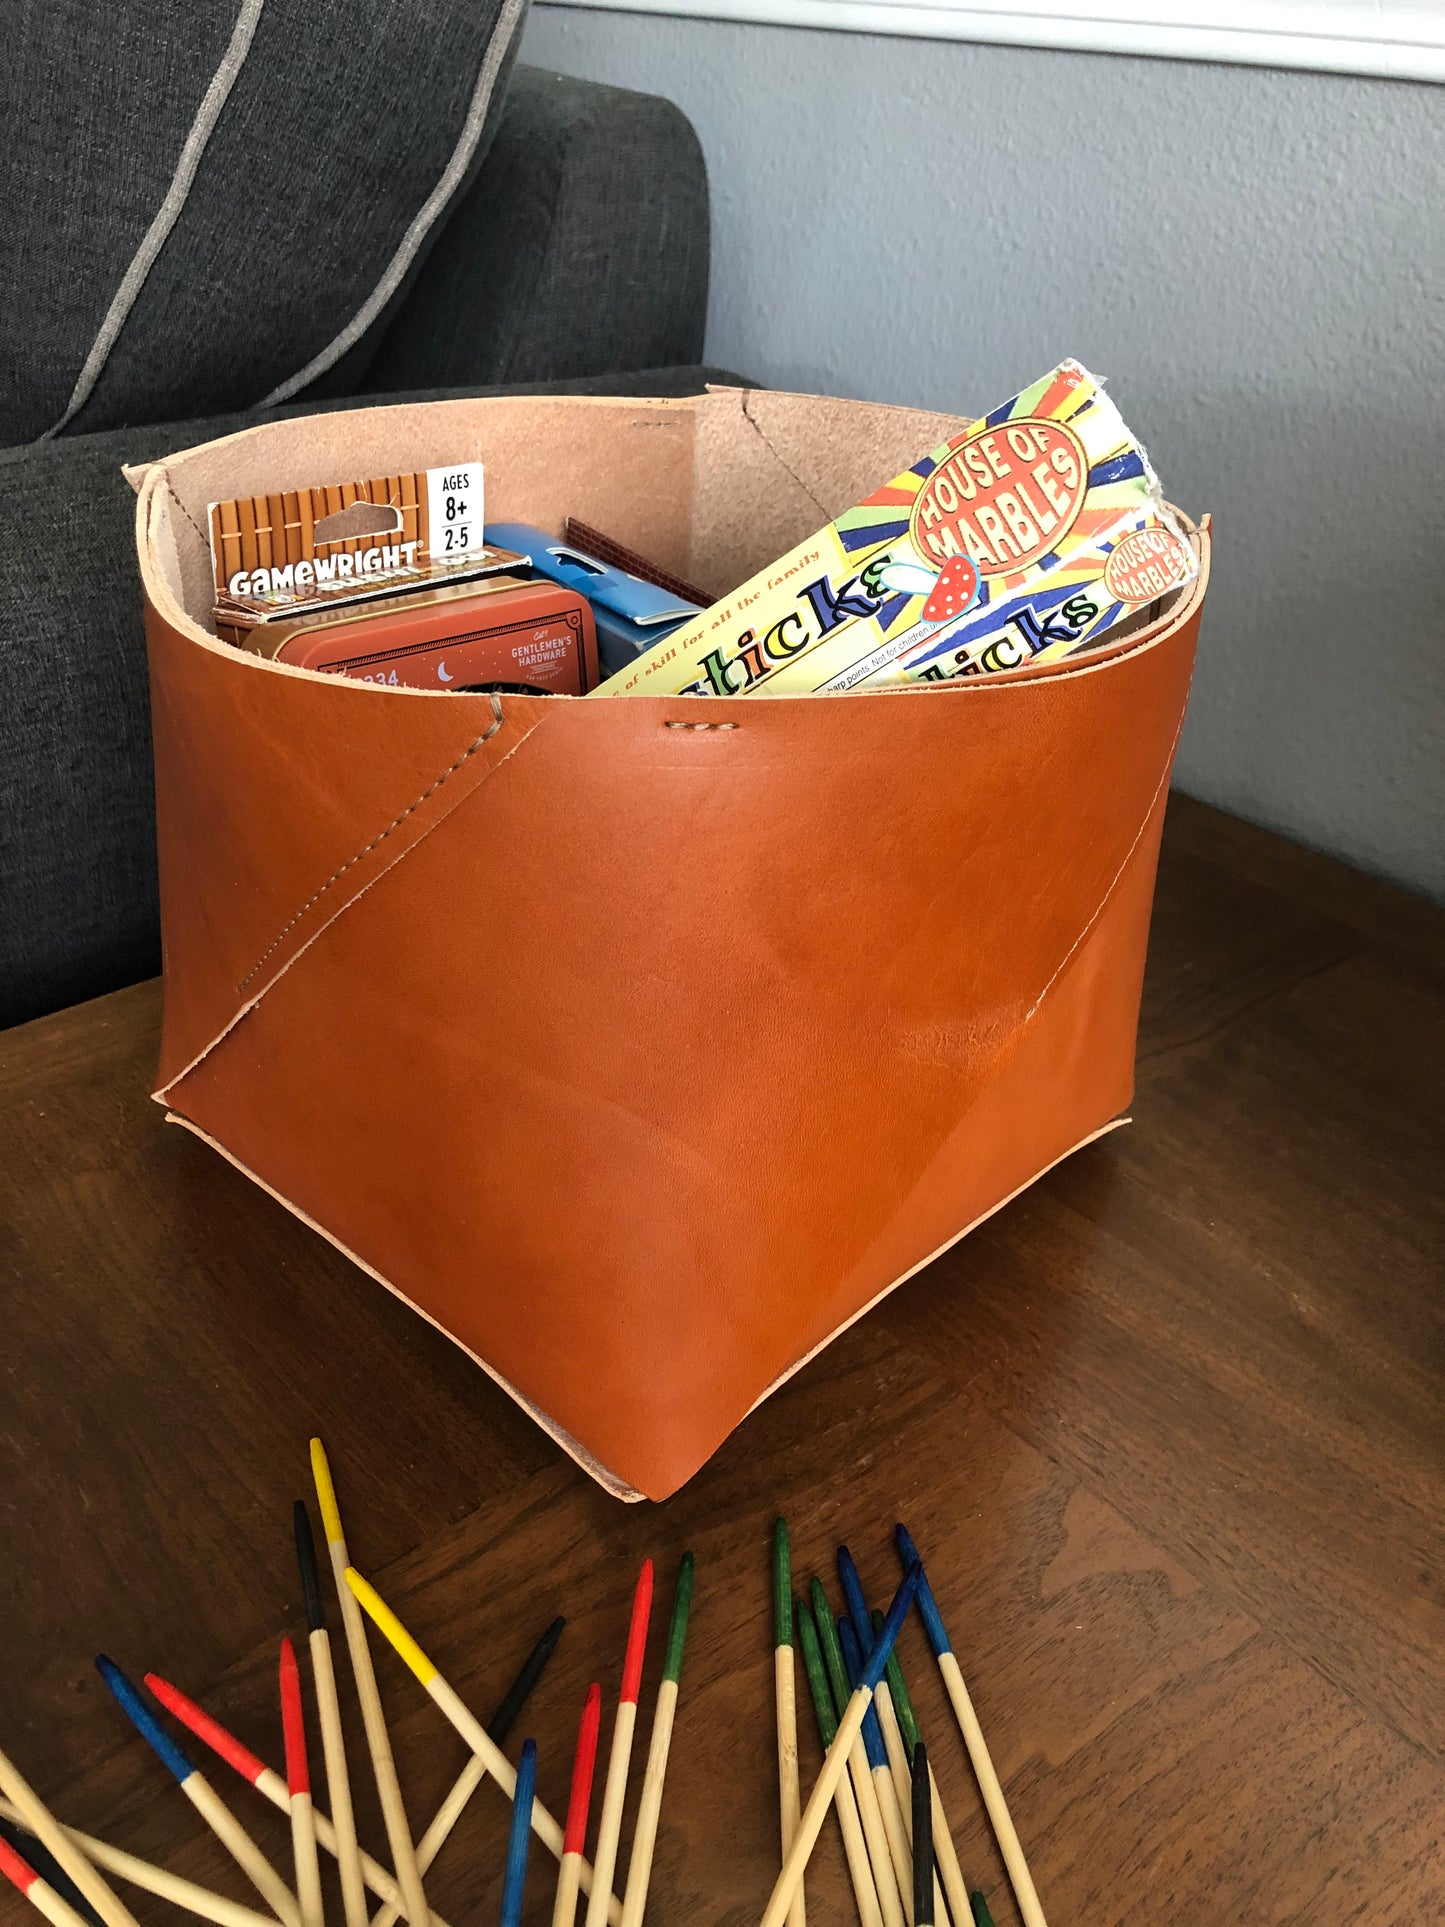 Tan leather bin holds an assortment of games.